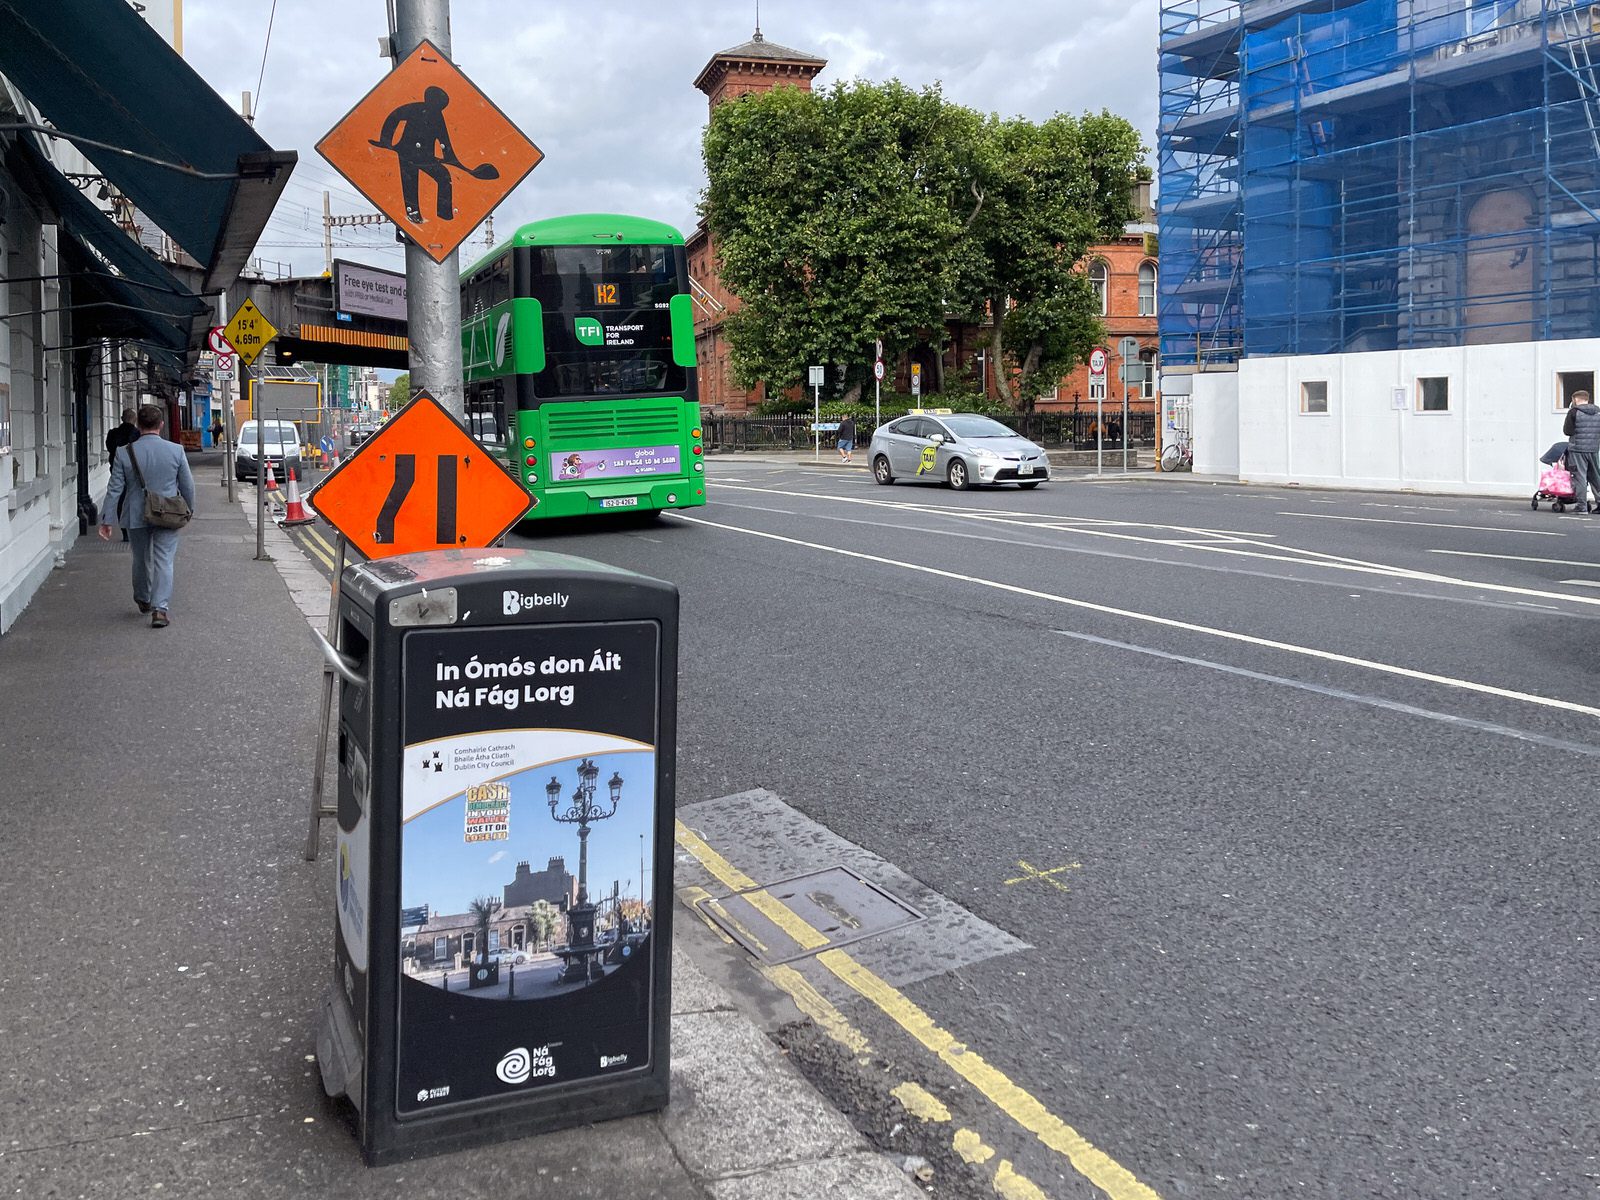 THE CLONTARF TO CITY CENTRE CYCLE AND BUS PRIORITY PROJECT [AMIENS STREET SECTION STILL A WORK IN PROGRESS] 006